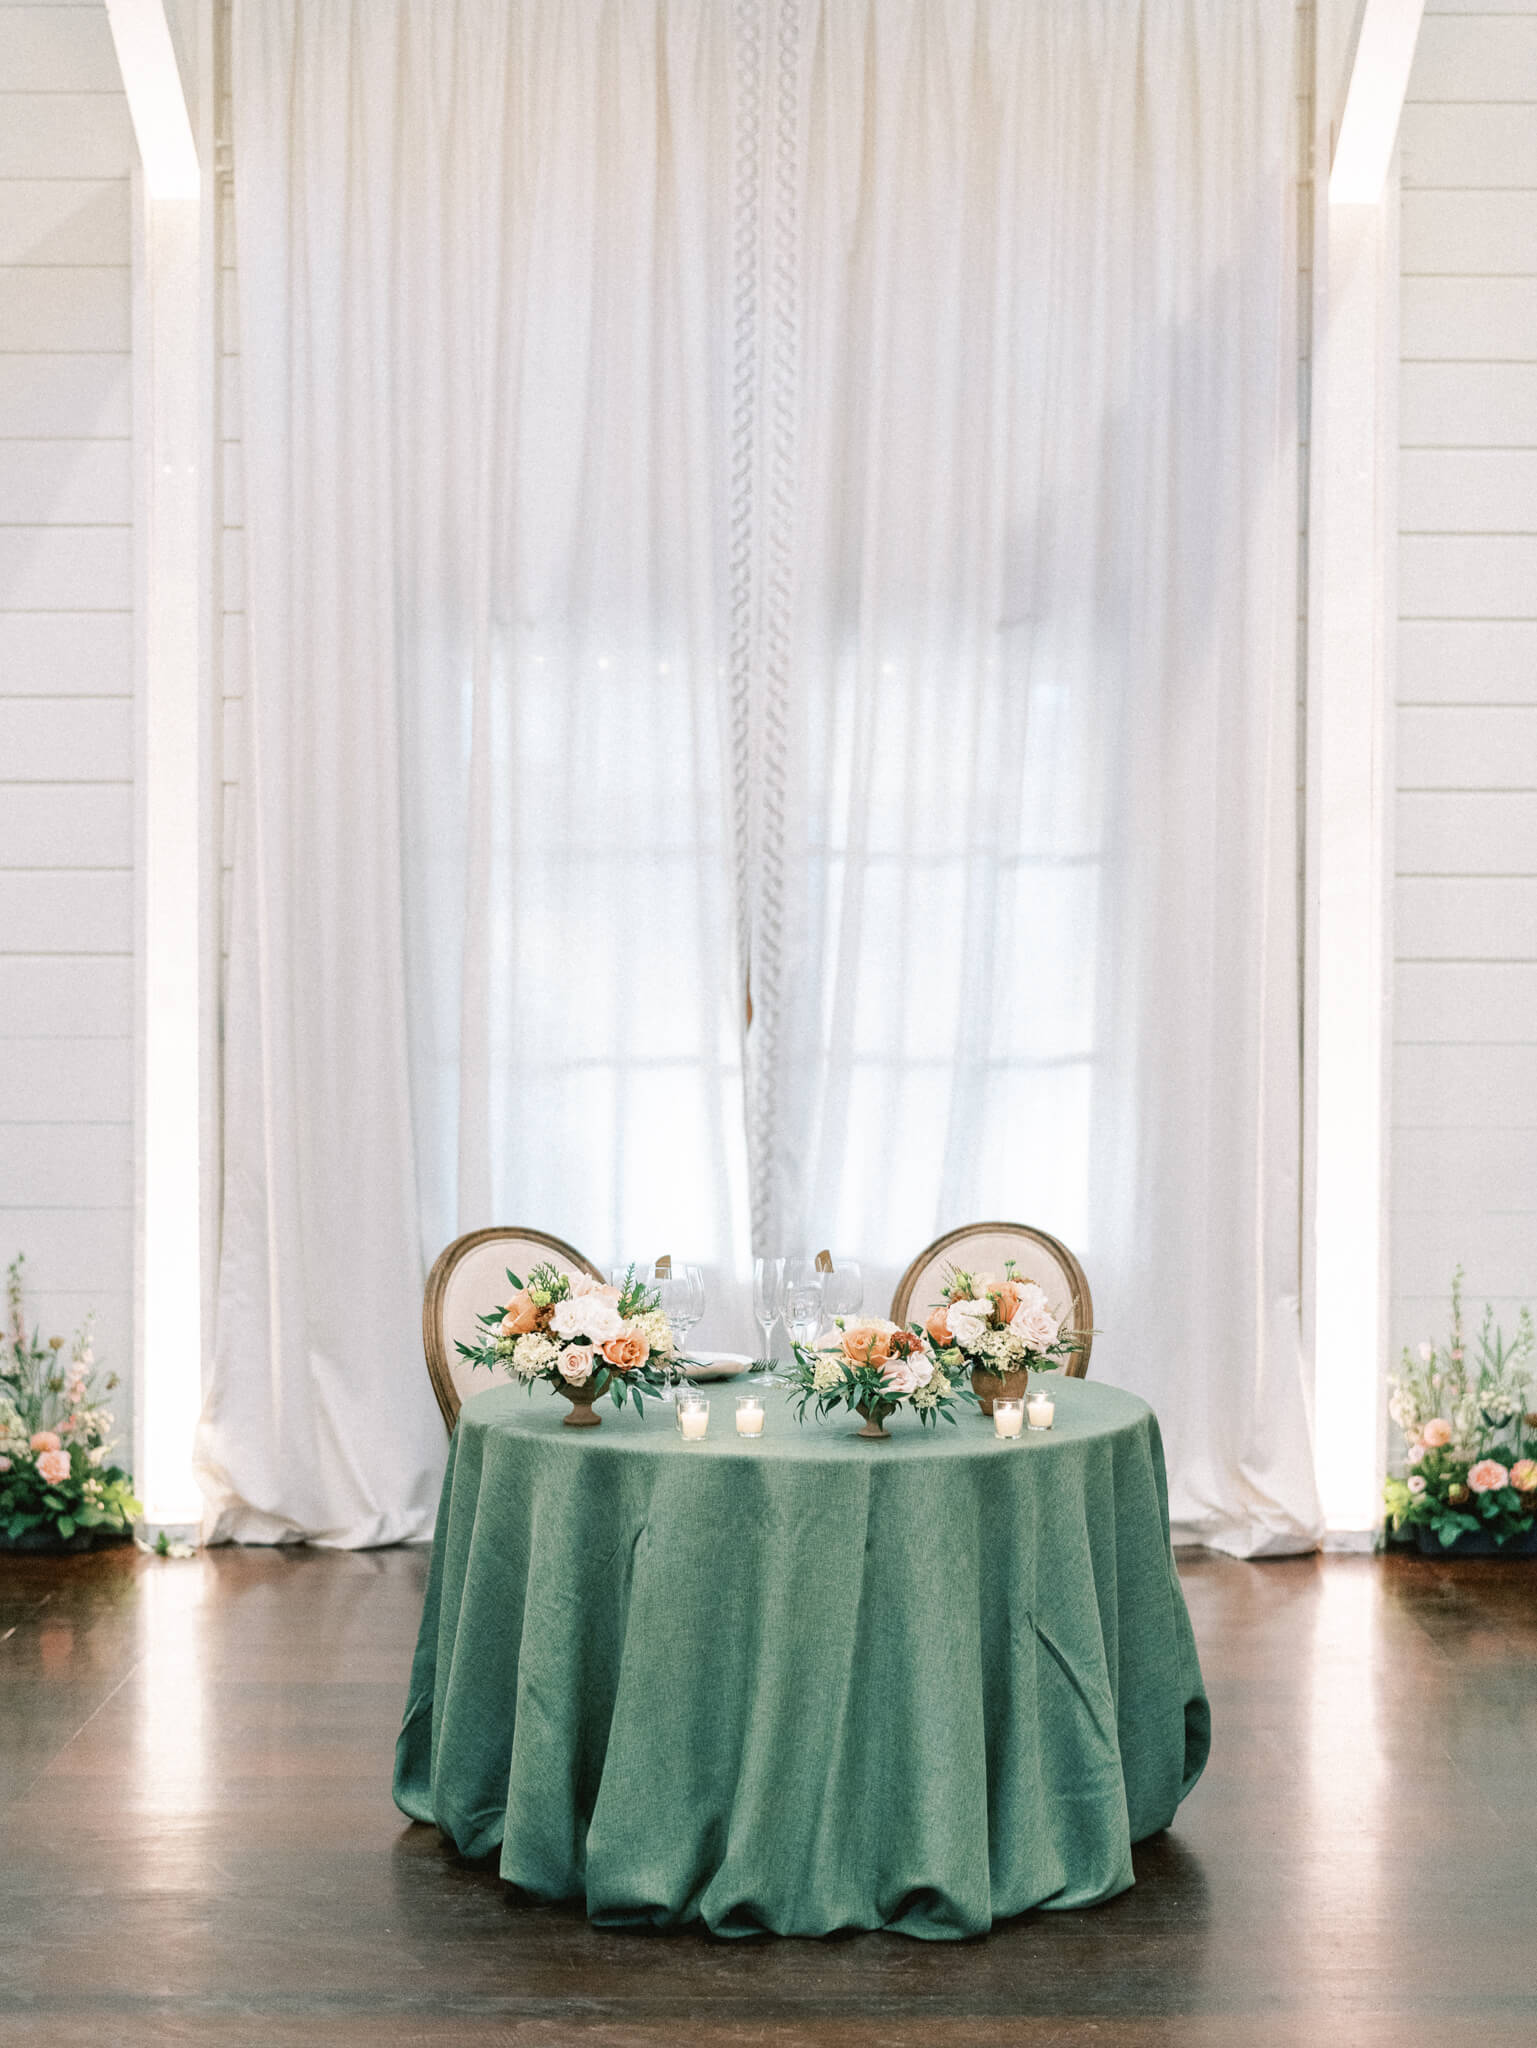 A sweetheart table at a Pippin Hill wedding reception with a green tablecloth, votive candles and peach and cream florals.